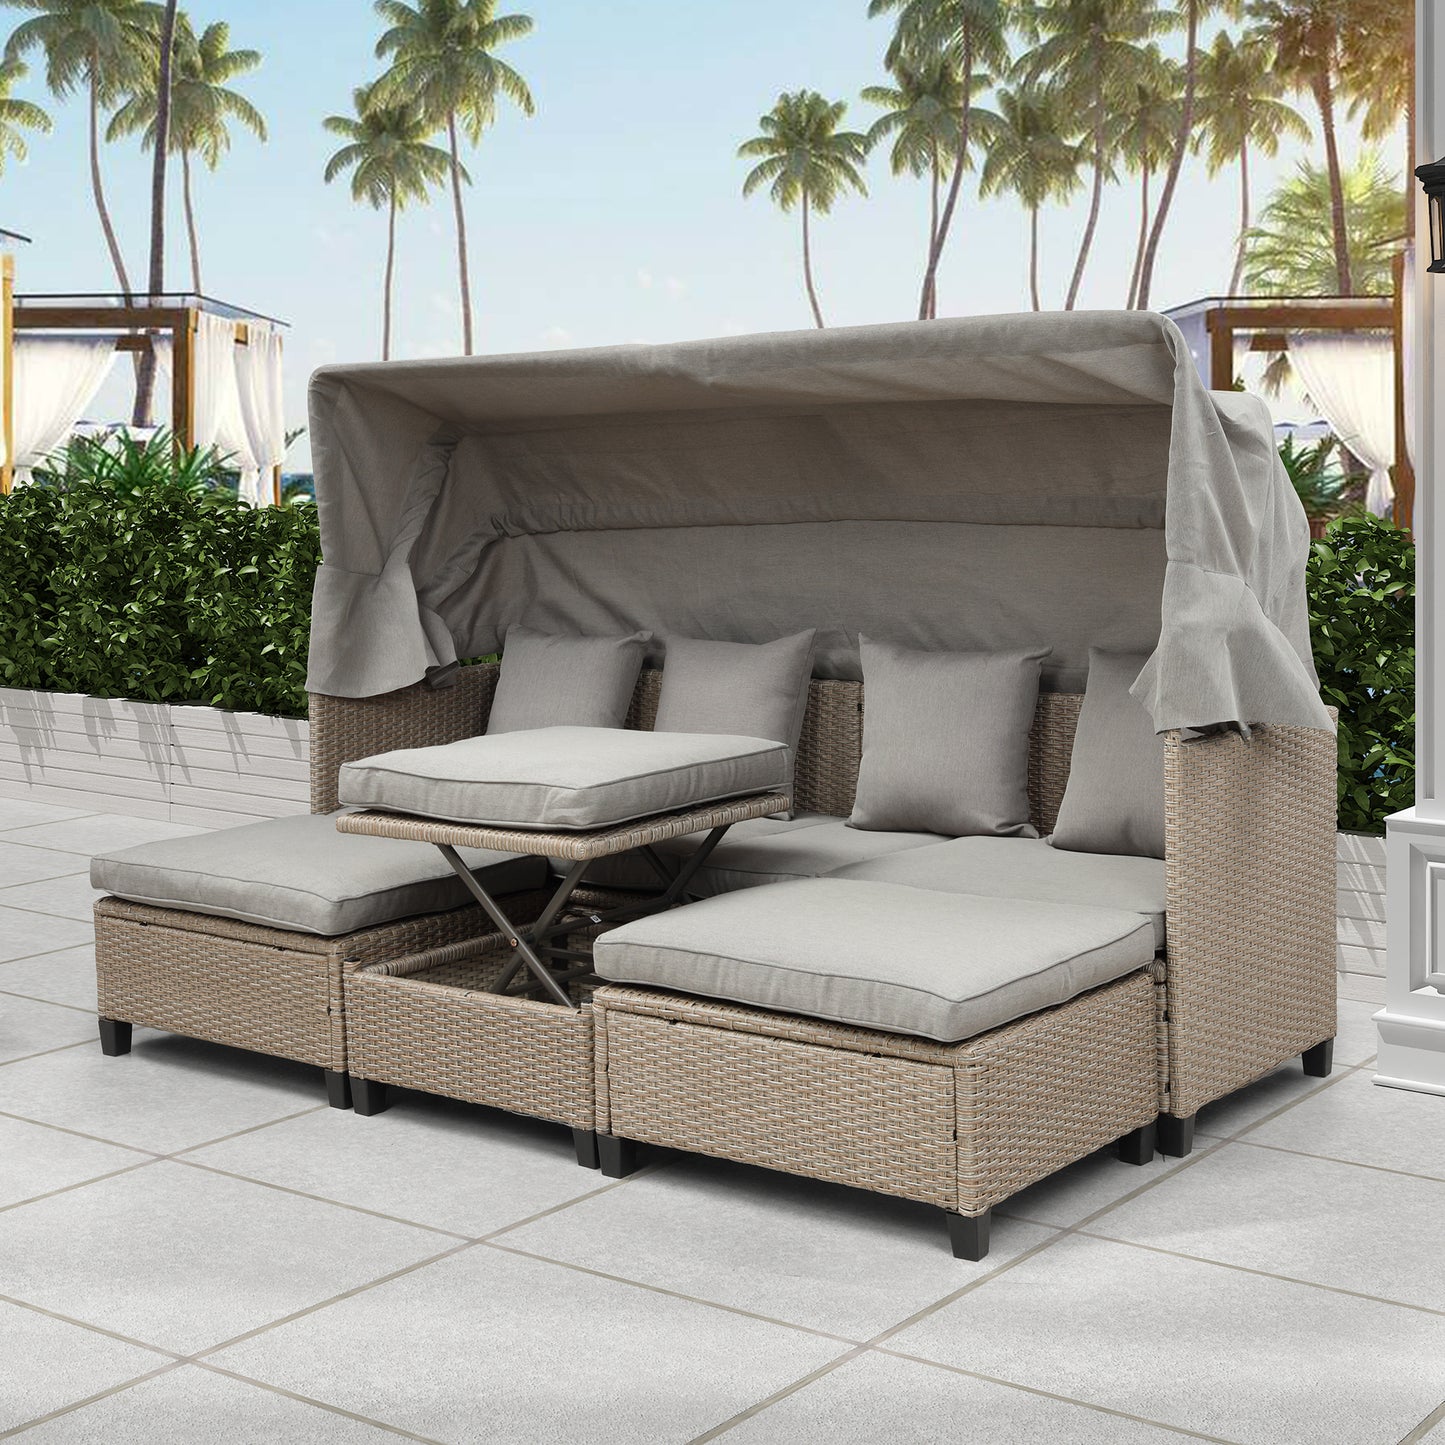 TOPMAX 4 Piece UV-Resistant Resin Wicker Patio Sofa Set with Retractable Canopy, Cushions and Lifting Table,Brown